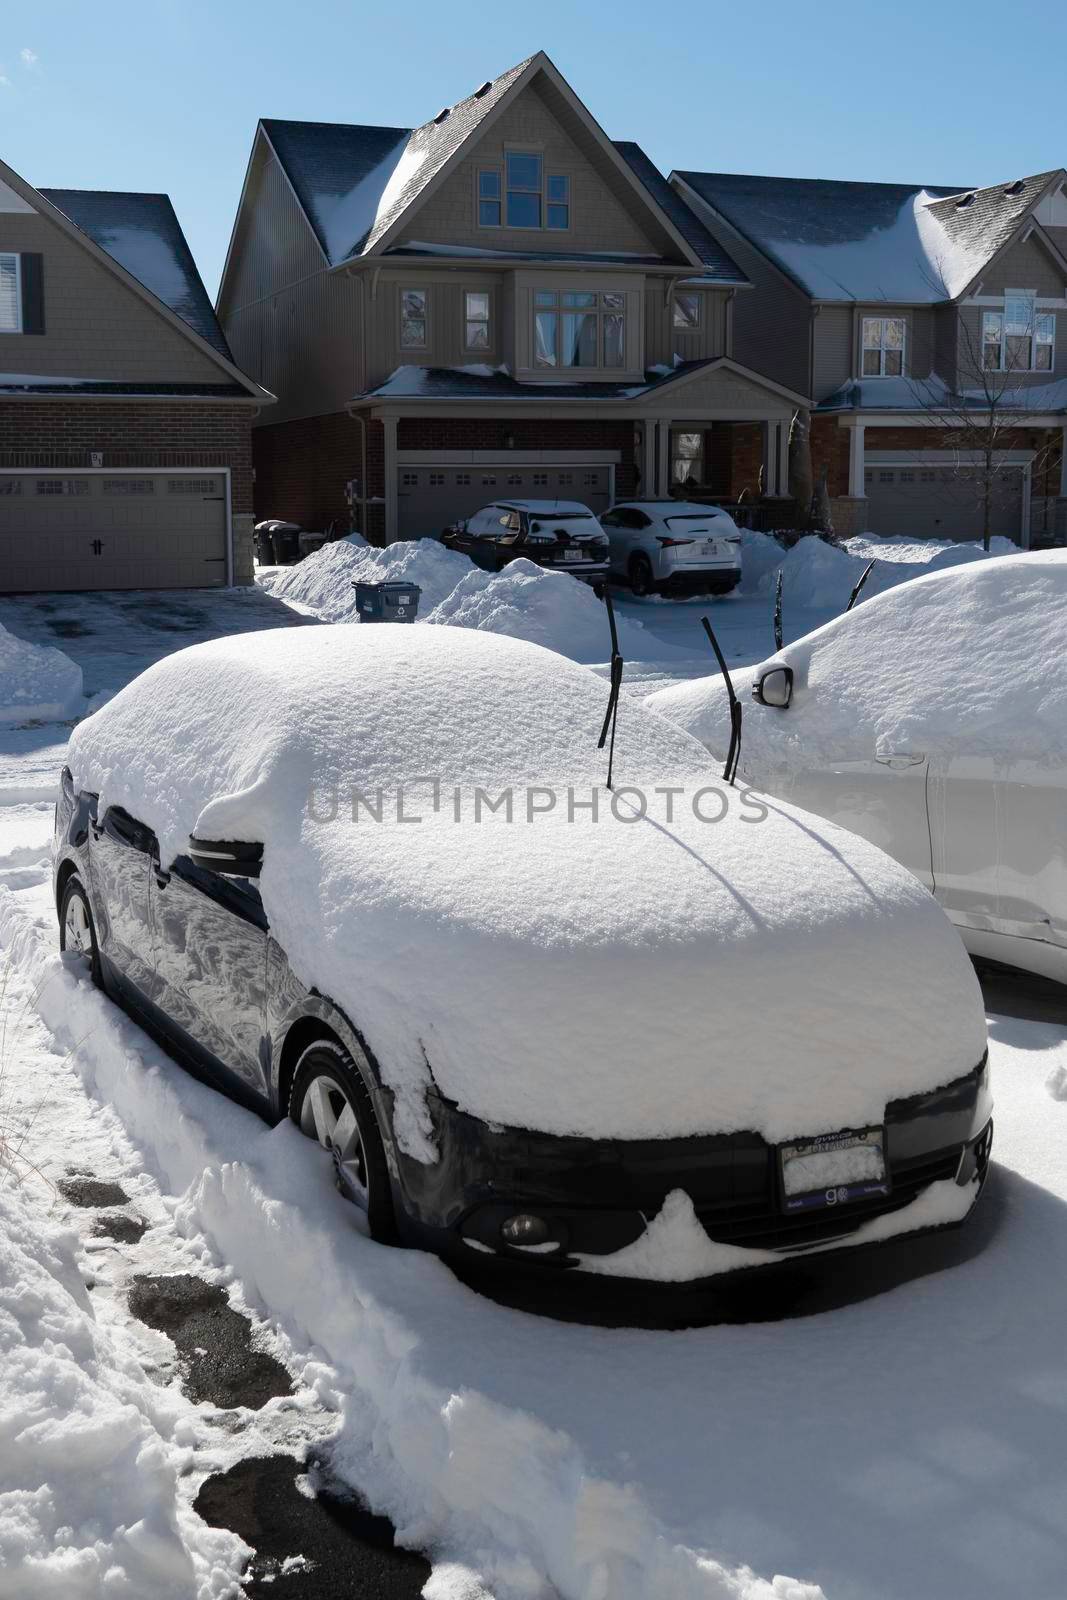 Snow fell again half a month before spring and covered cars parked on the street